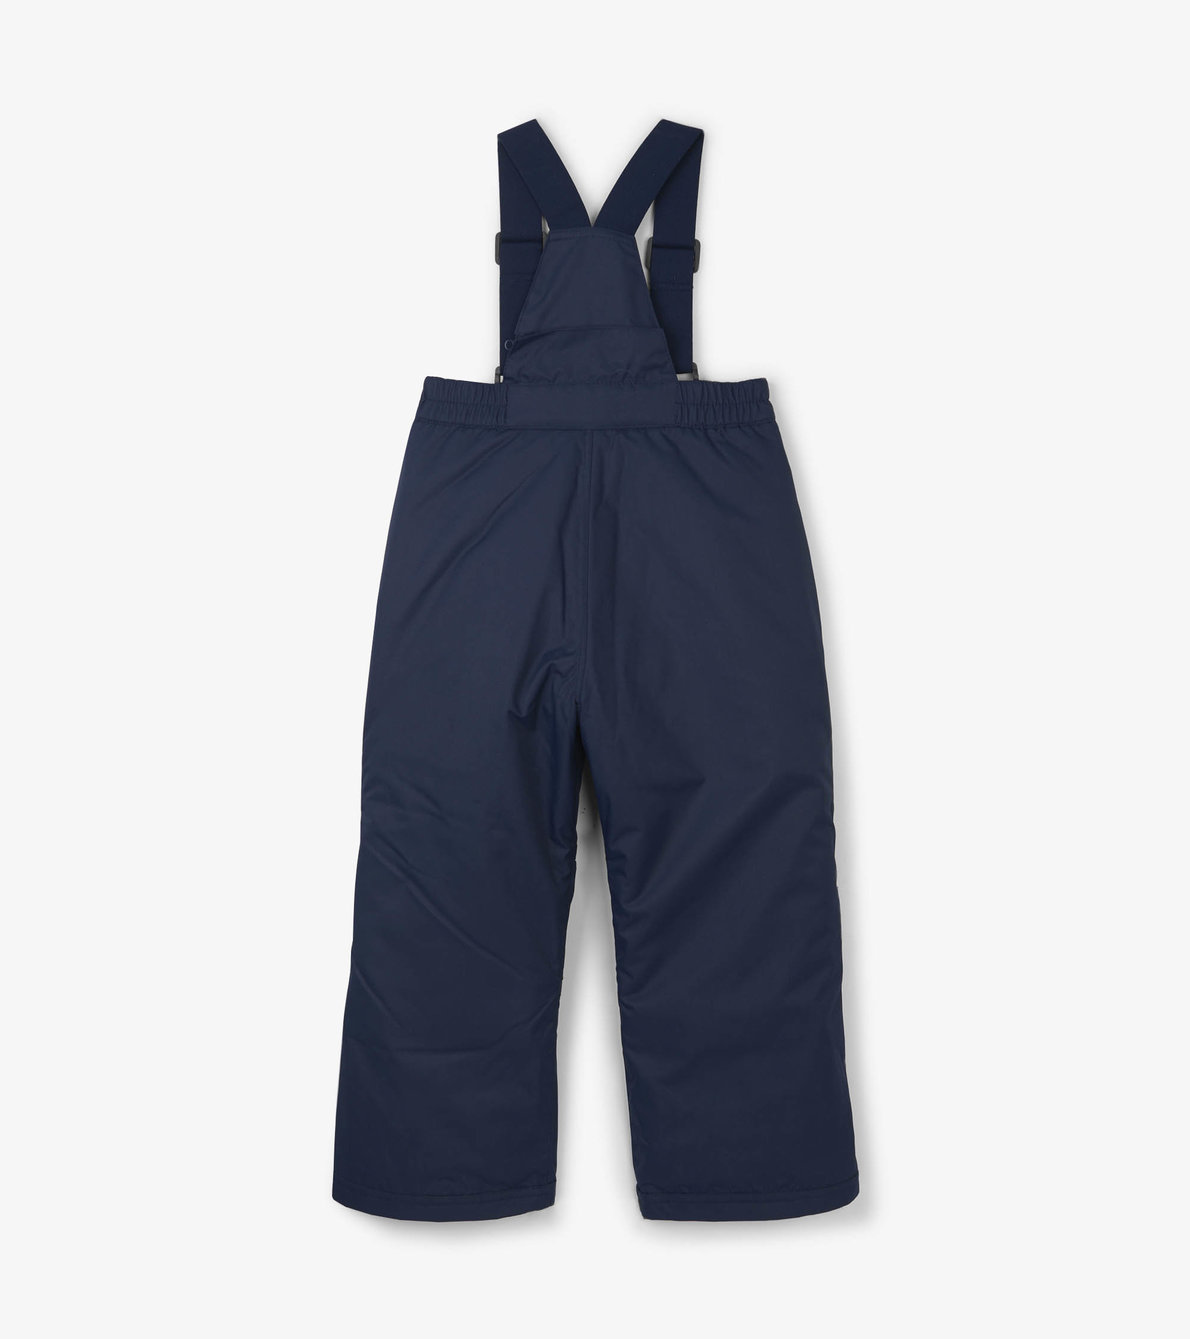 View larger image of Navy Snow Pants